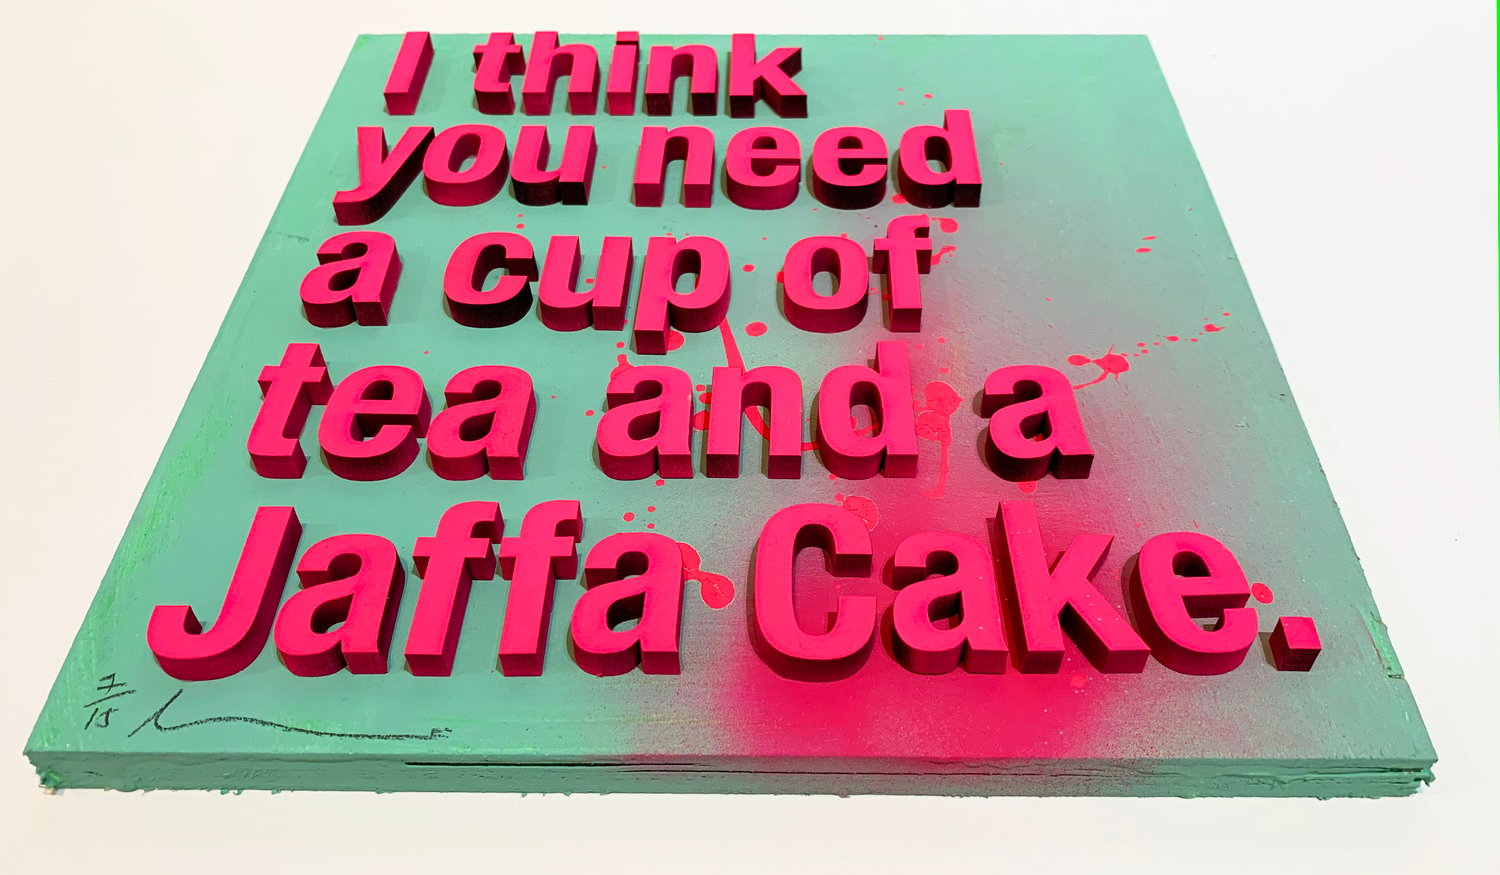 Image of 'I think you need a cup of tea and a Jaffa Cake." by Dave Buonaguidi